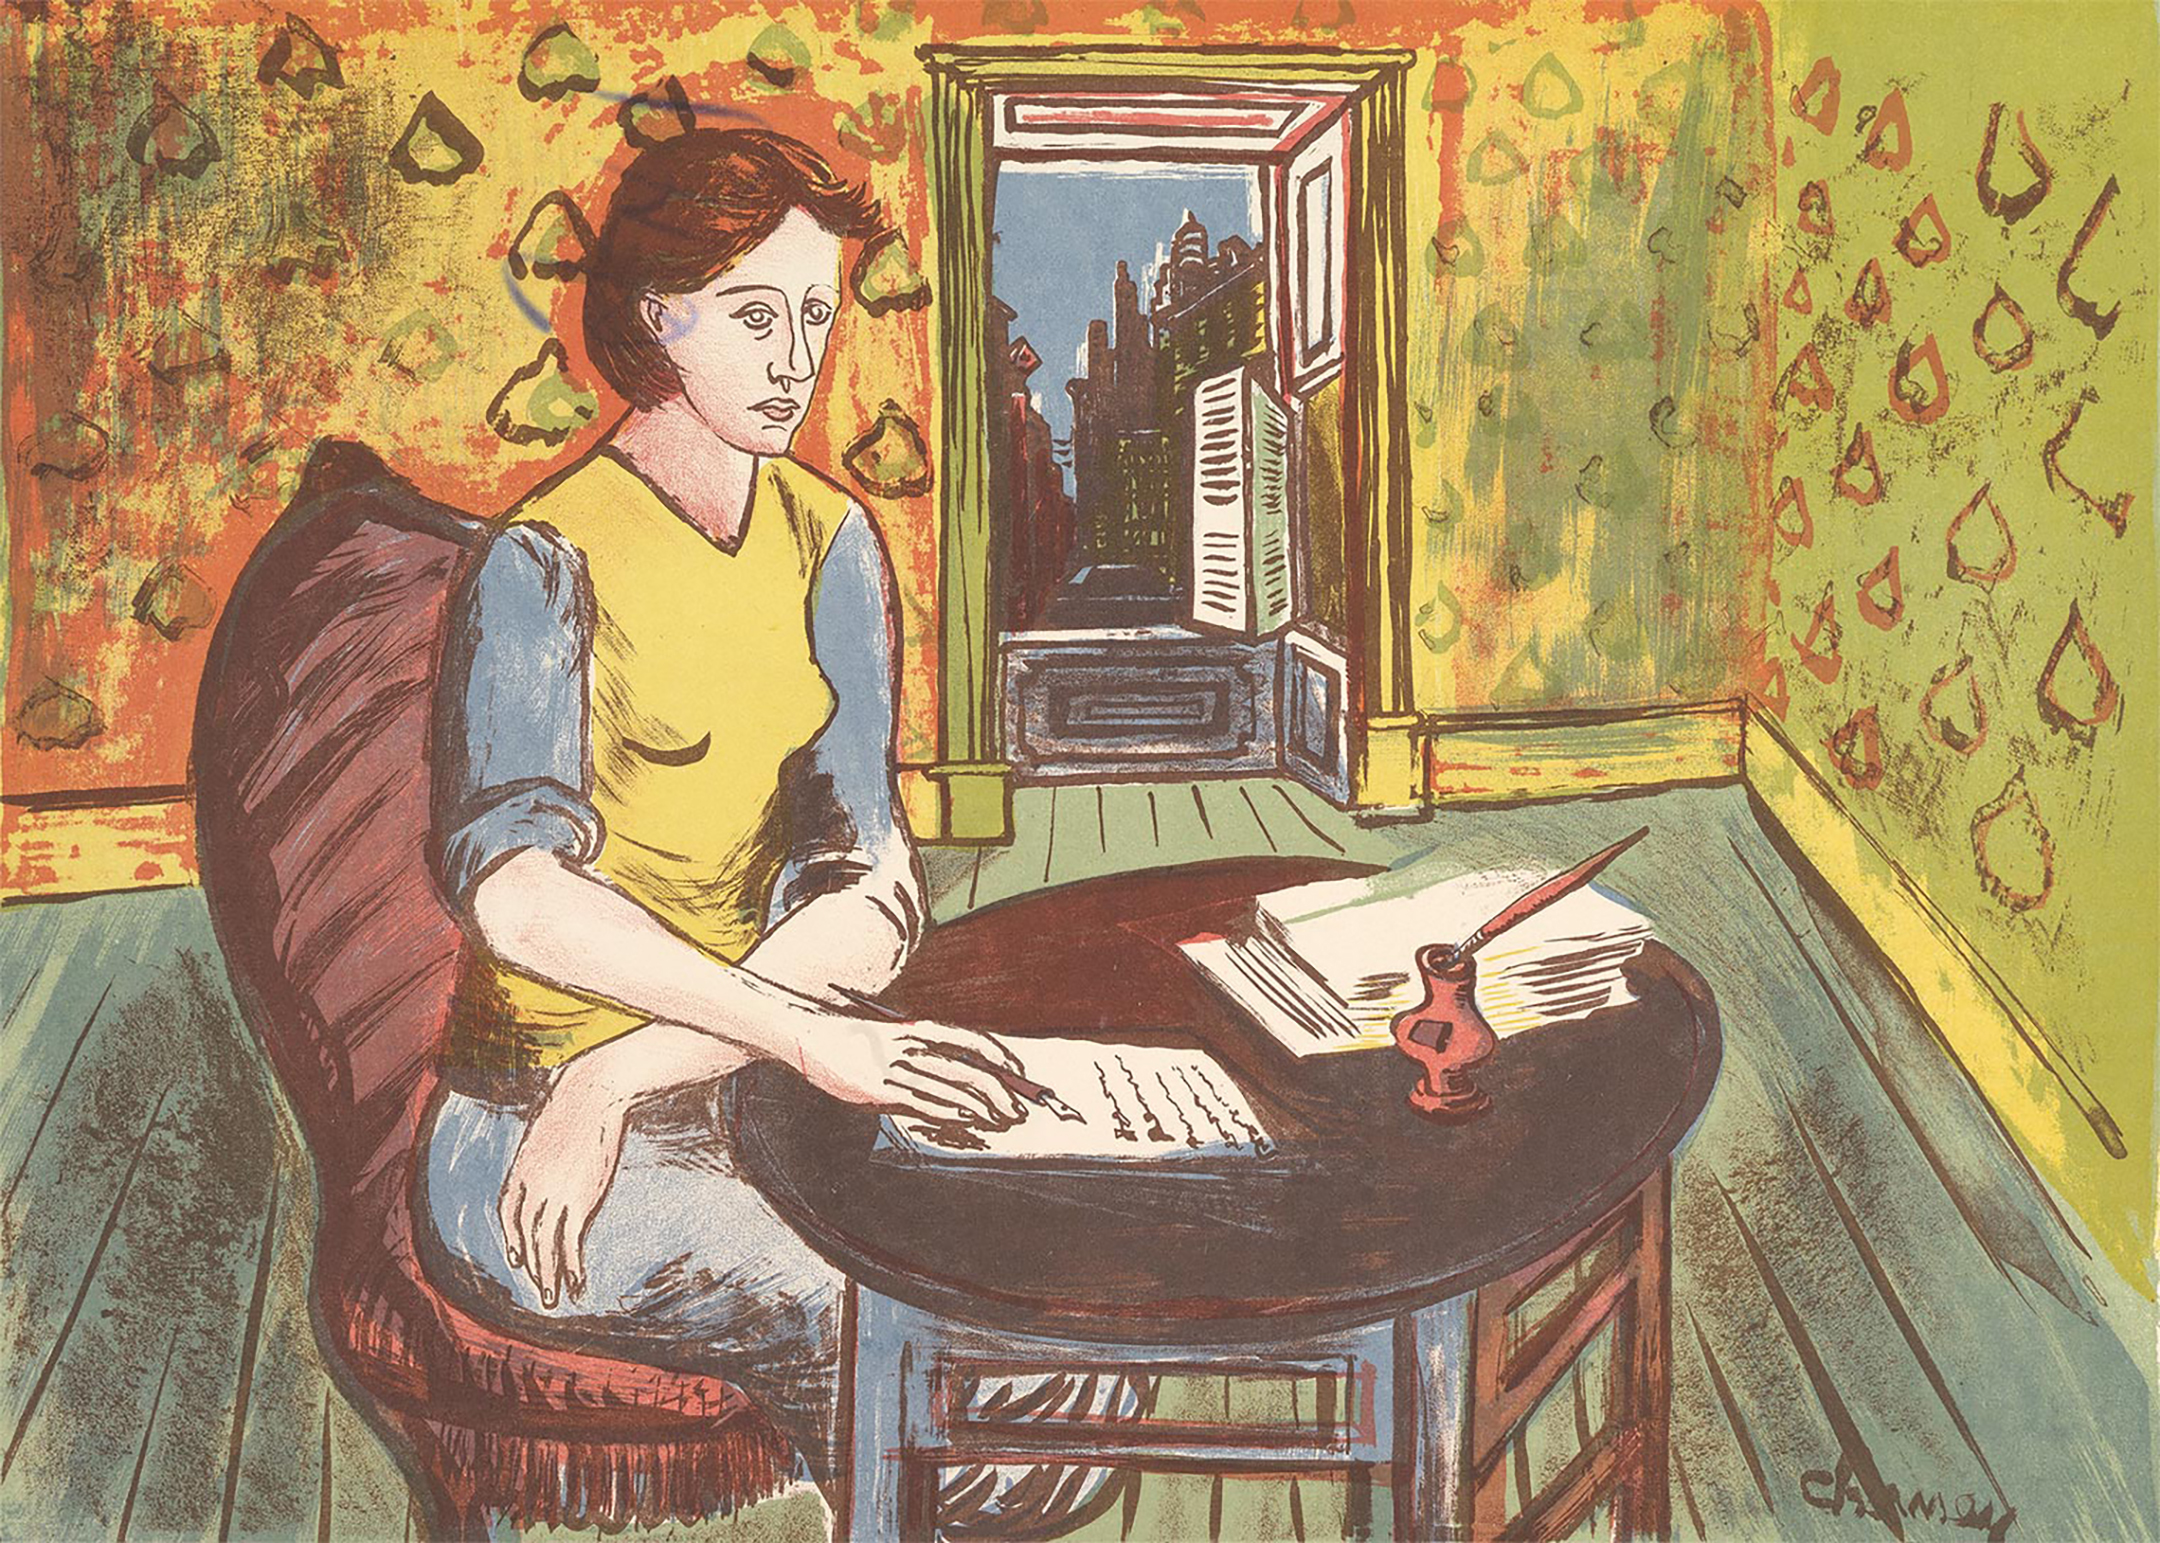 The painting the writer by American artist ruth Chaney depicting a young woman in a yellow/green room, wearing a yellow and blue outfit sitting at a small table writing a letter with the window open to an urban night scene